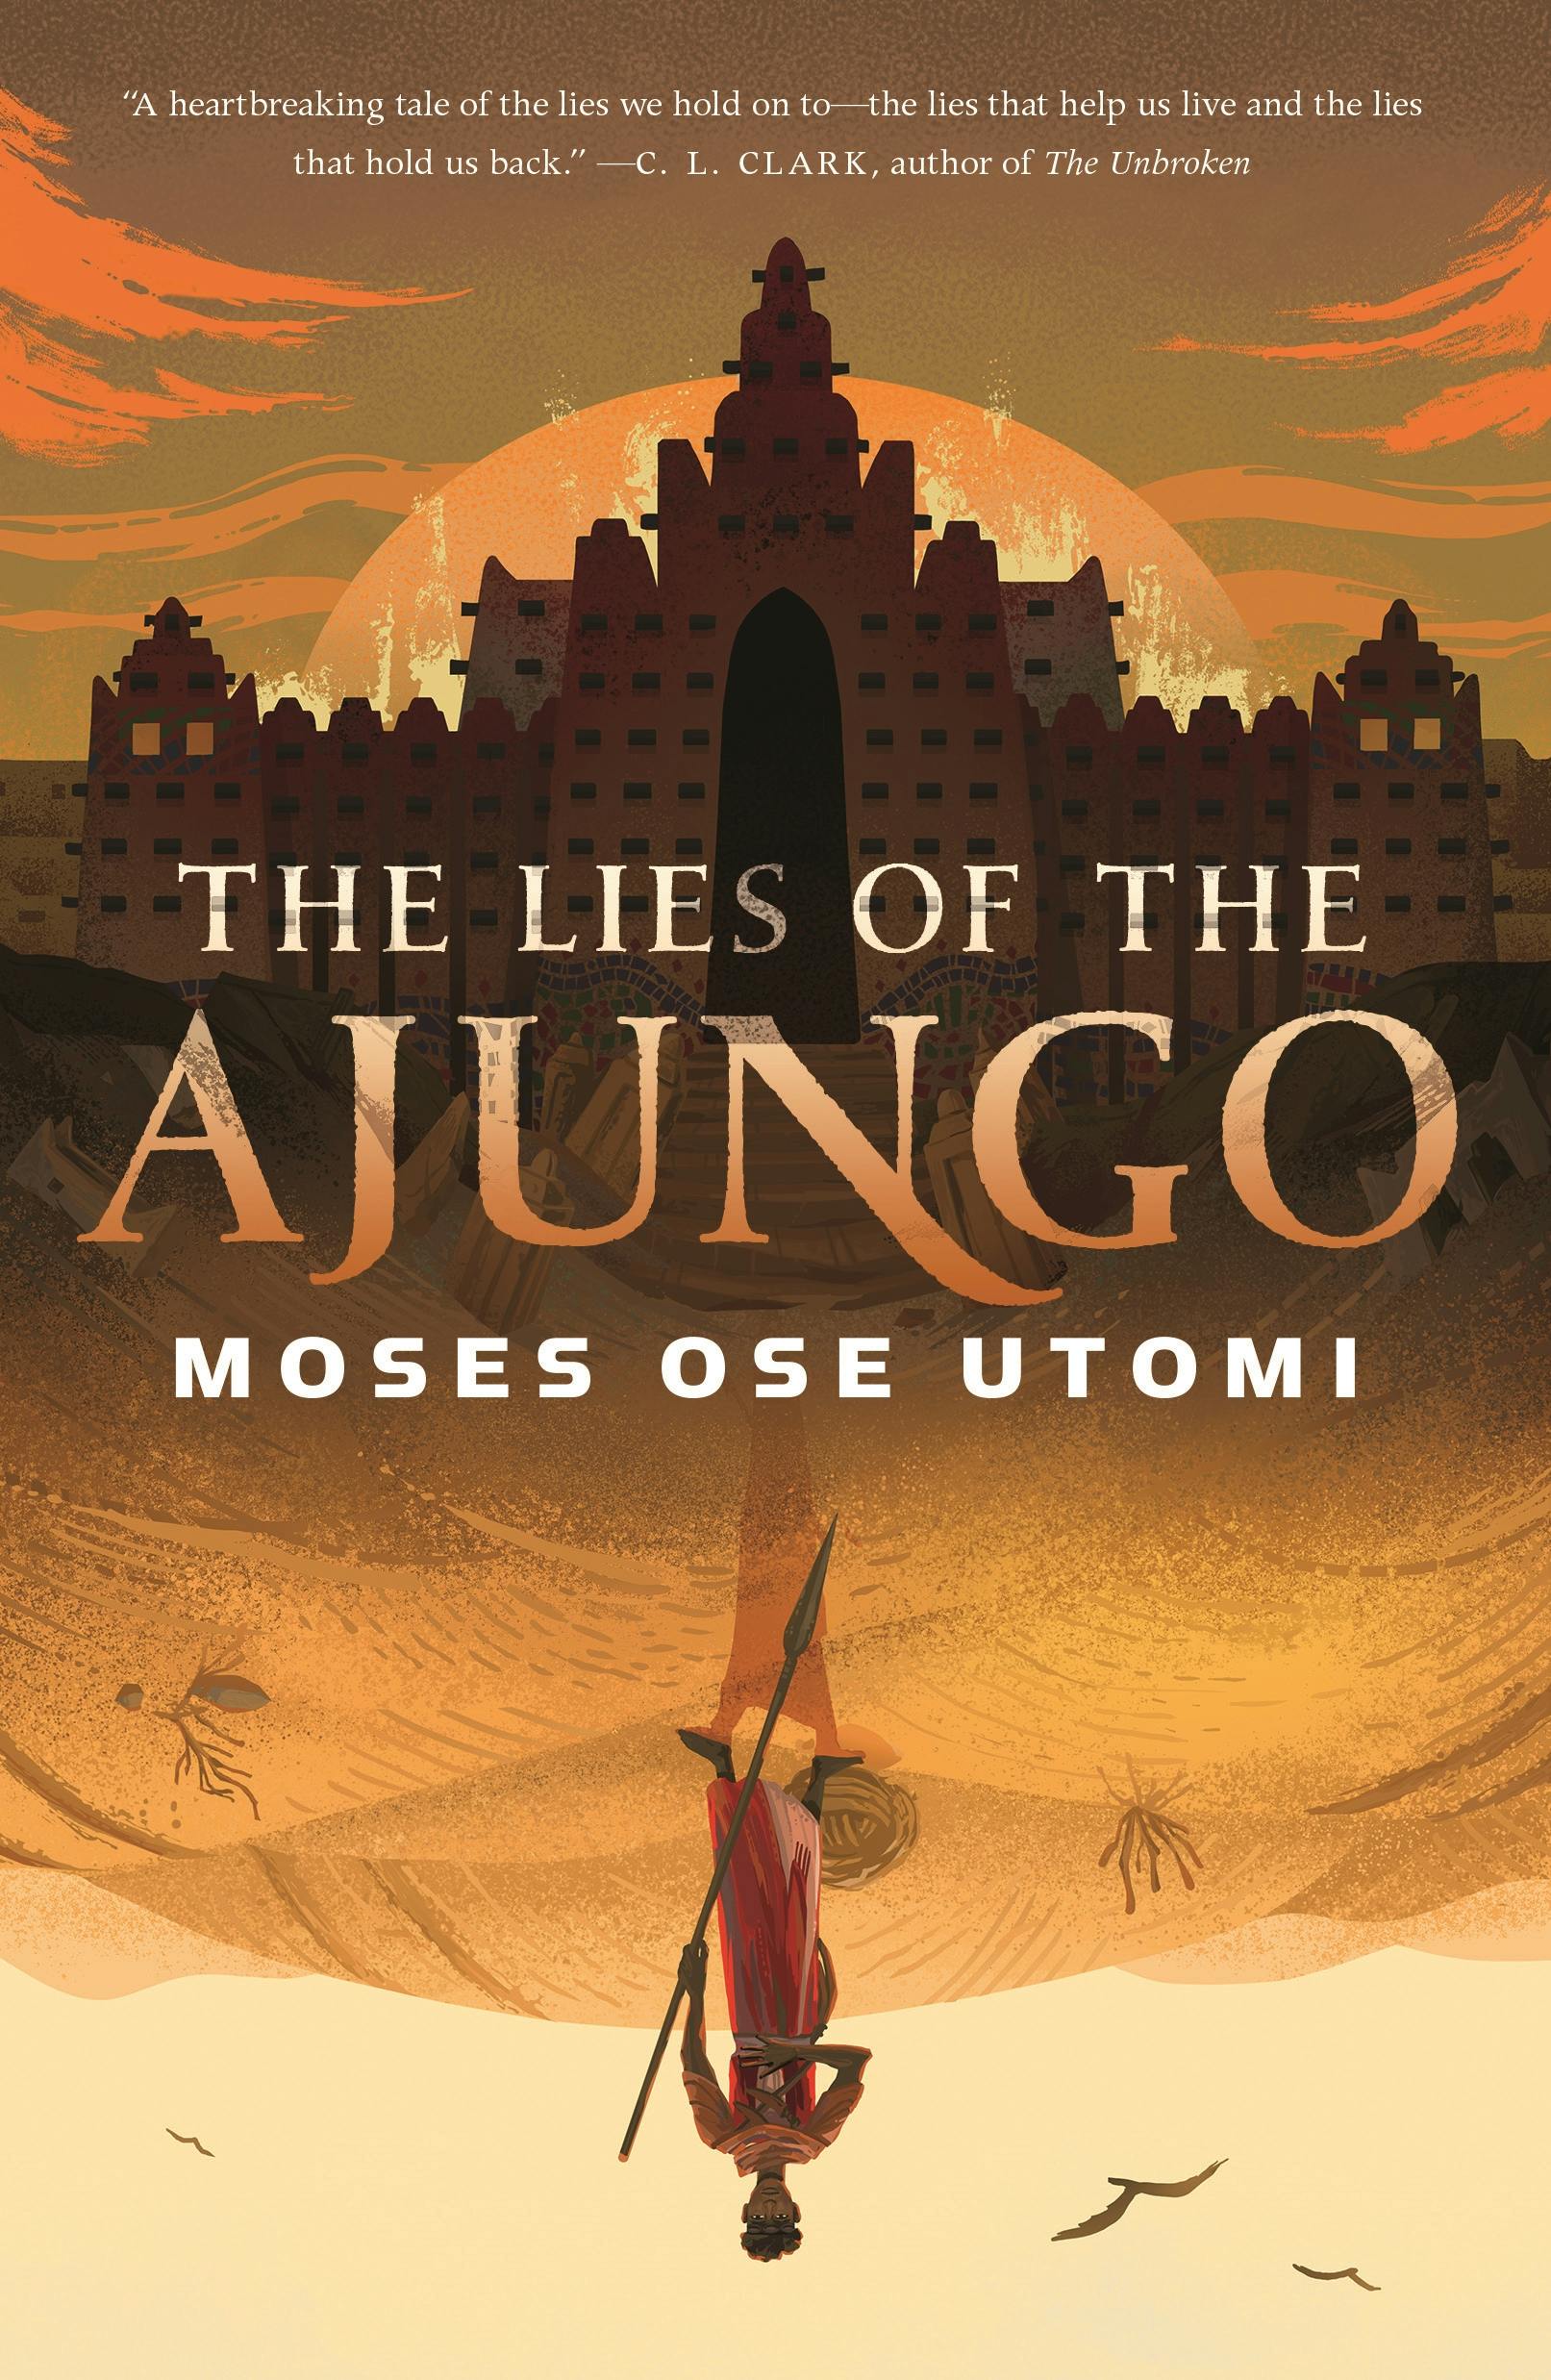 Cover for the book titled as: The Lies of the Ajungo